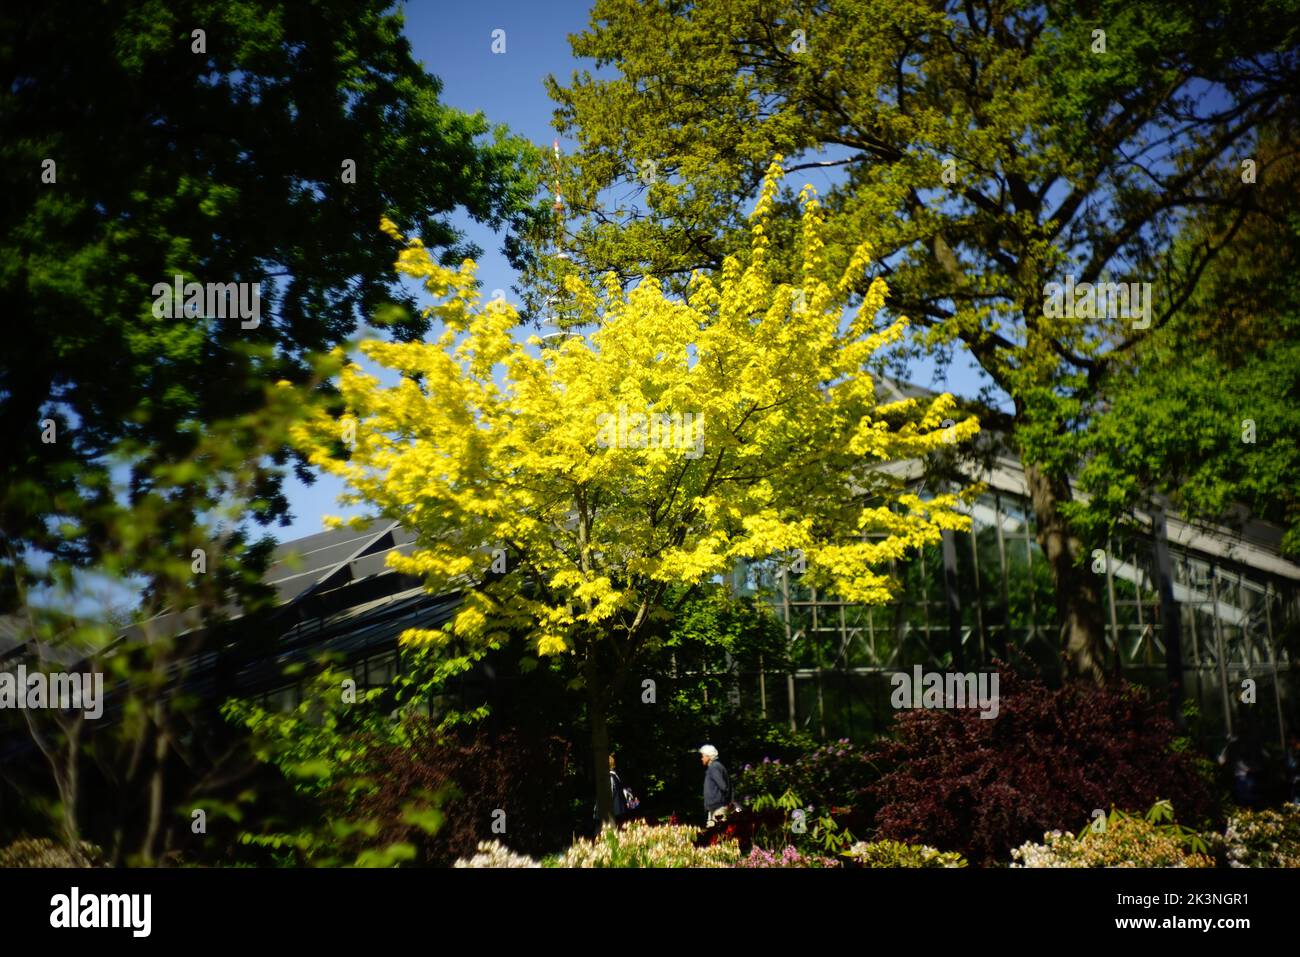 A yellow Forsythia flowering plant in the garden Stock Photo